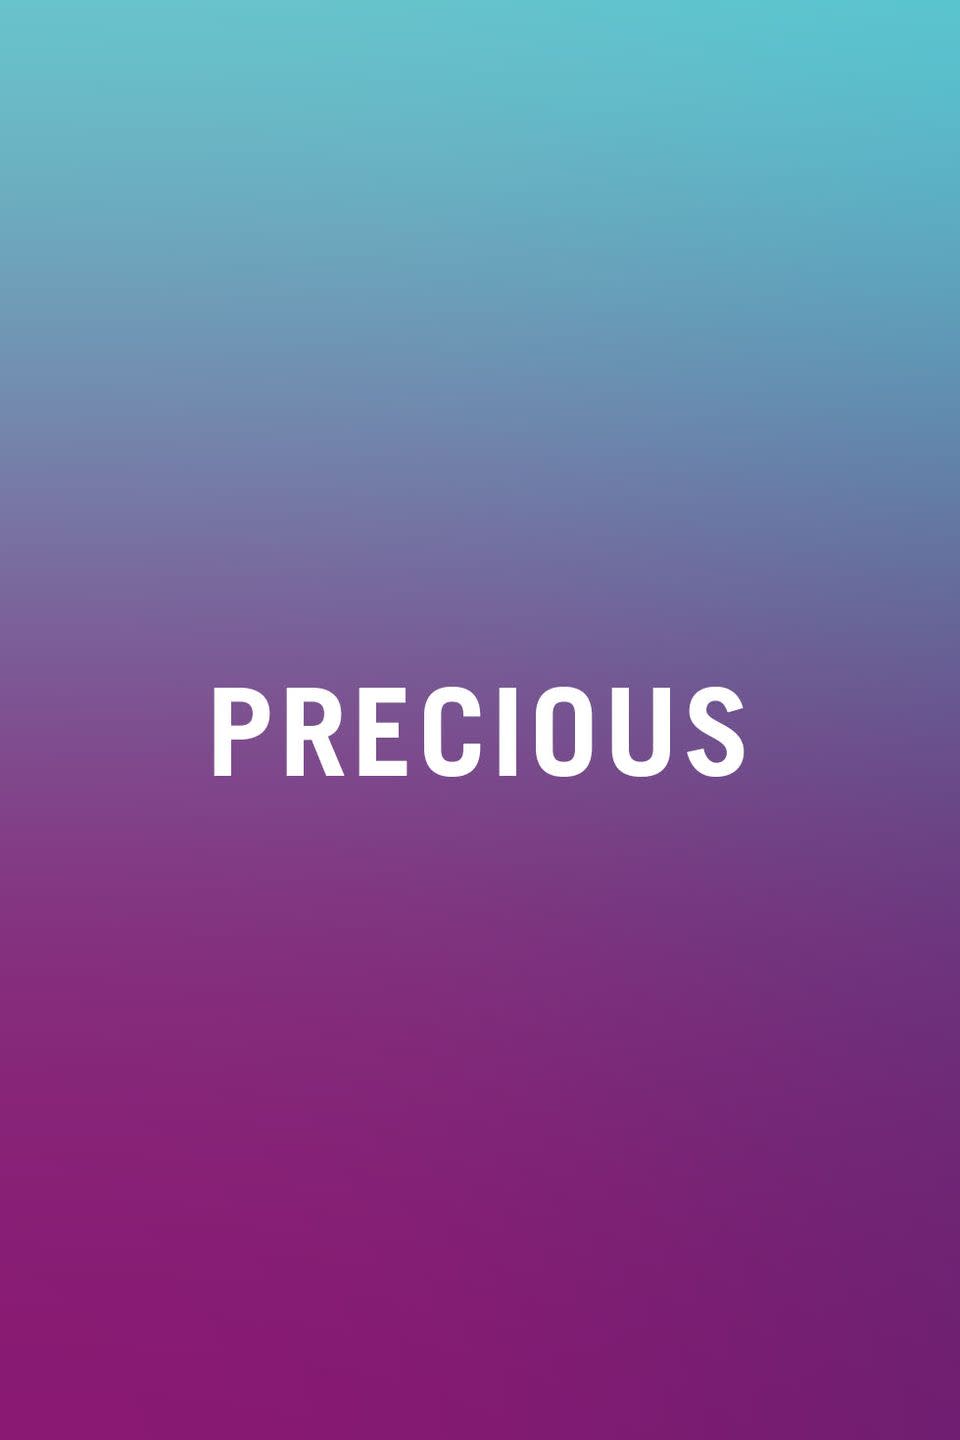 <p>Precious used to mean something dear or valuable (or a ring to rule them all, depending on your childhood), but these days it's become a backhanded compliment. Unless you're speaking to a baby, when you call someone precious now, it sounds like you think they're too cute and probably also a little stupid. </p>